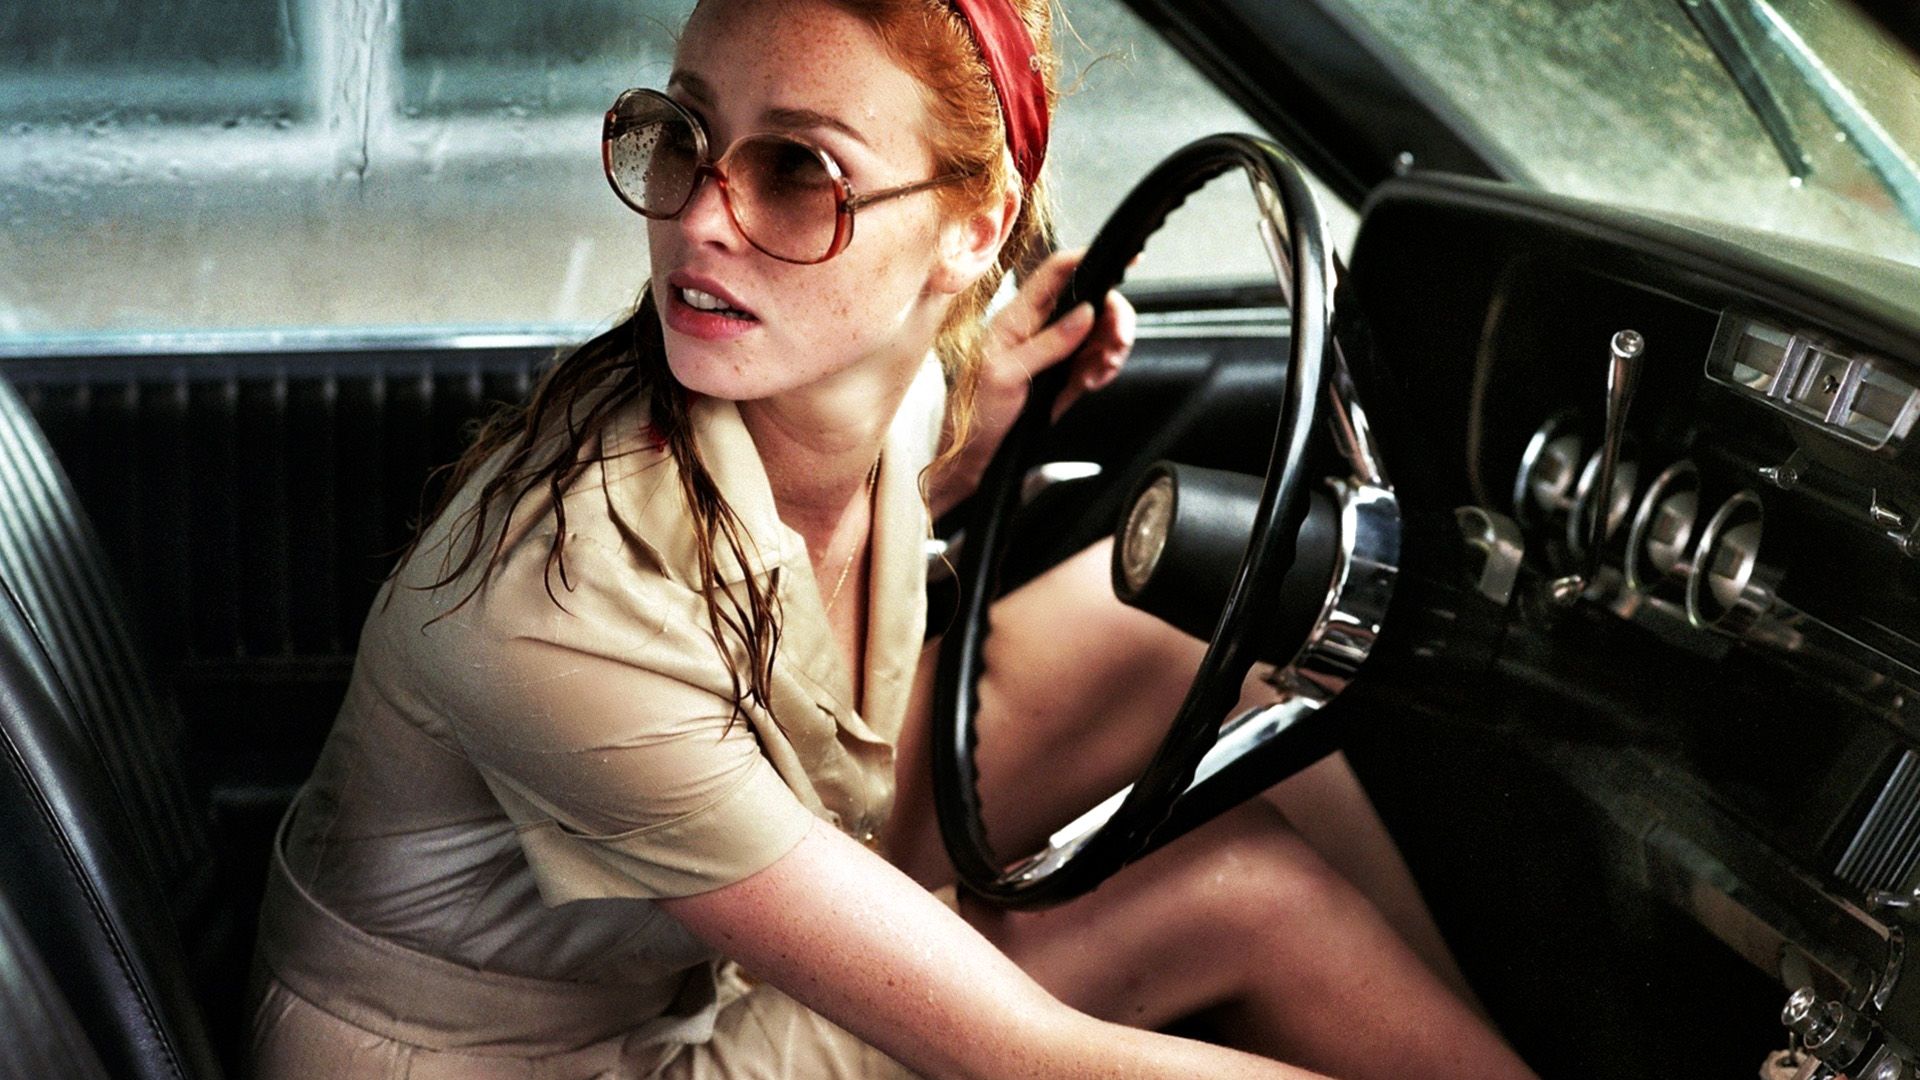 The Lady in the Car with Glasses and a Gun background